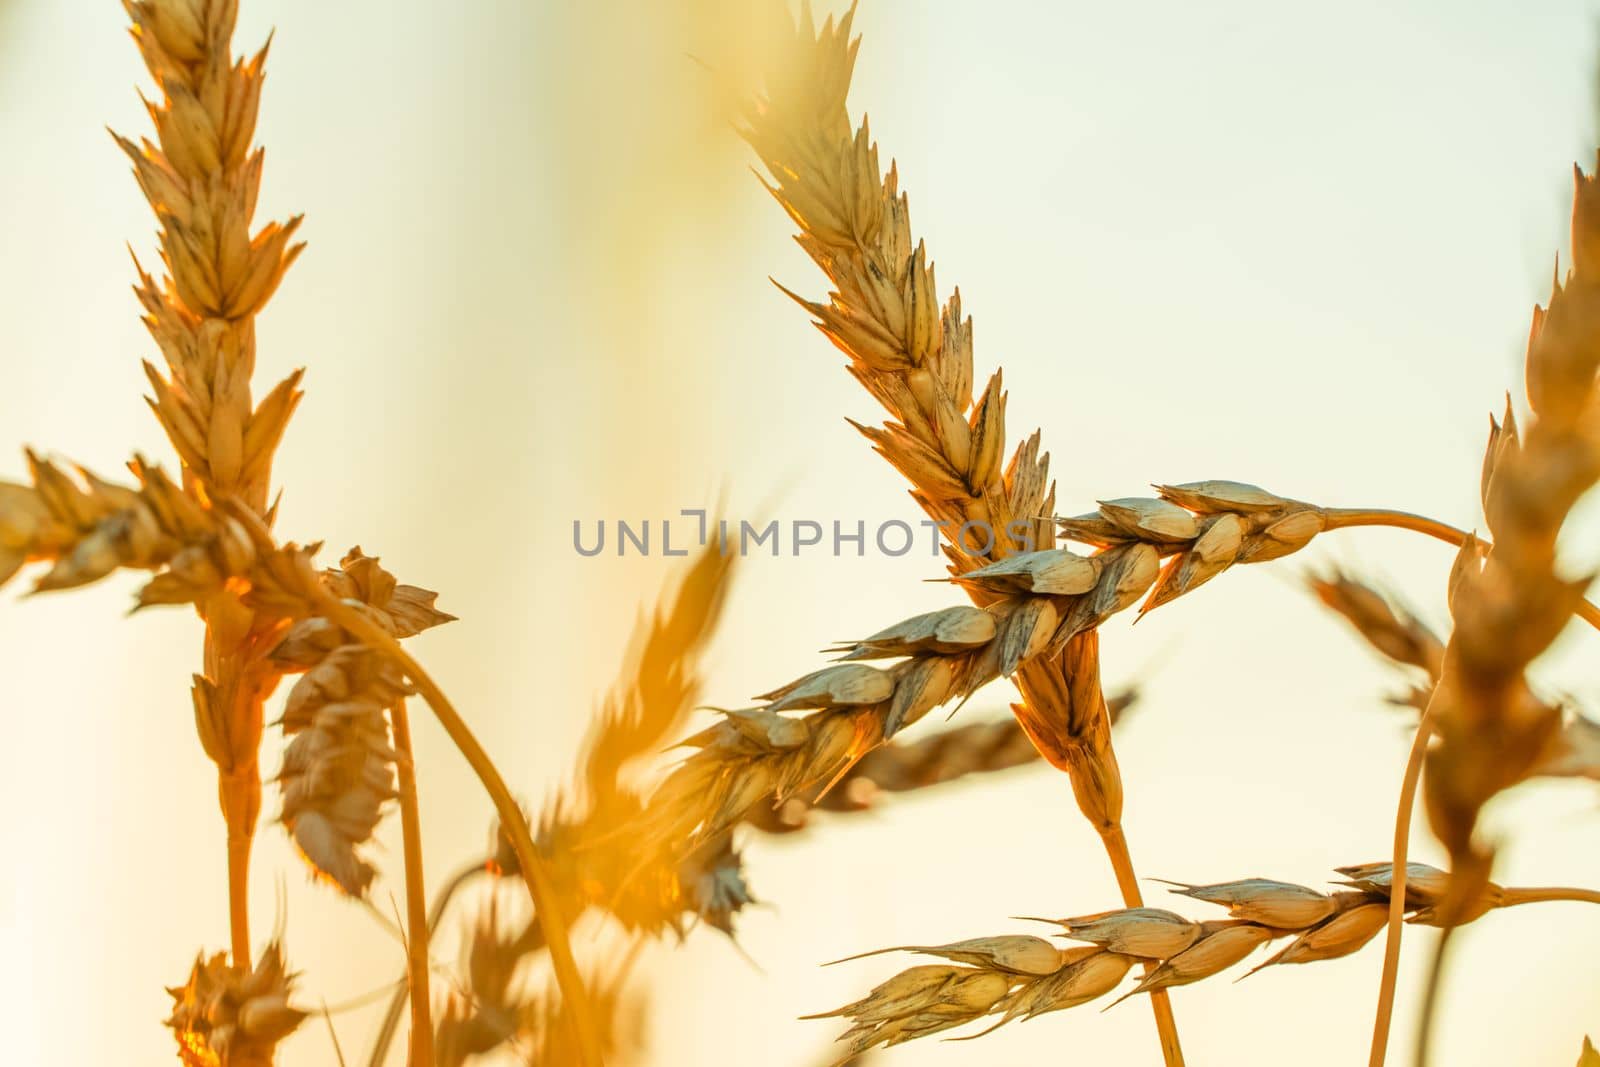 Golden Cereal field with ears of wheat,Agriculture farm and farming concept.Harvest.Wheat field.Rural Scenery.Ripening ears.Rancho harvest Concept.Ripe ears of wheat.Cereal crop.Bread, rye and grain